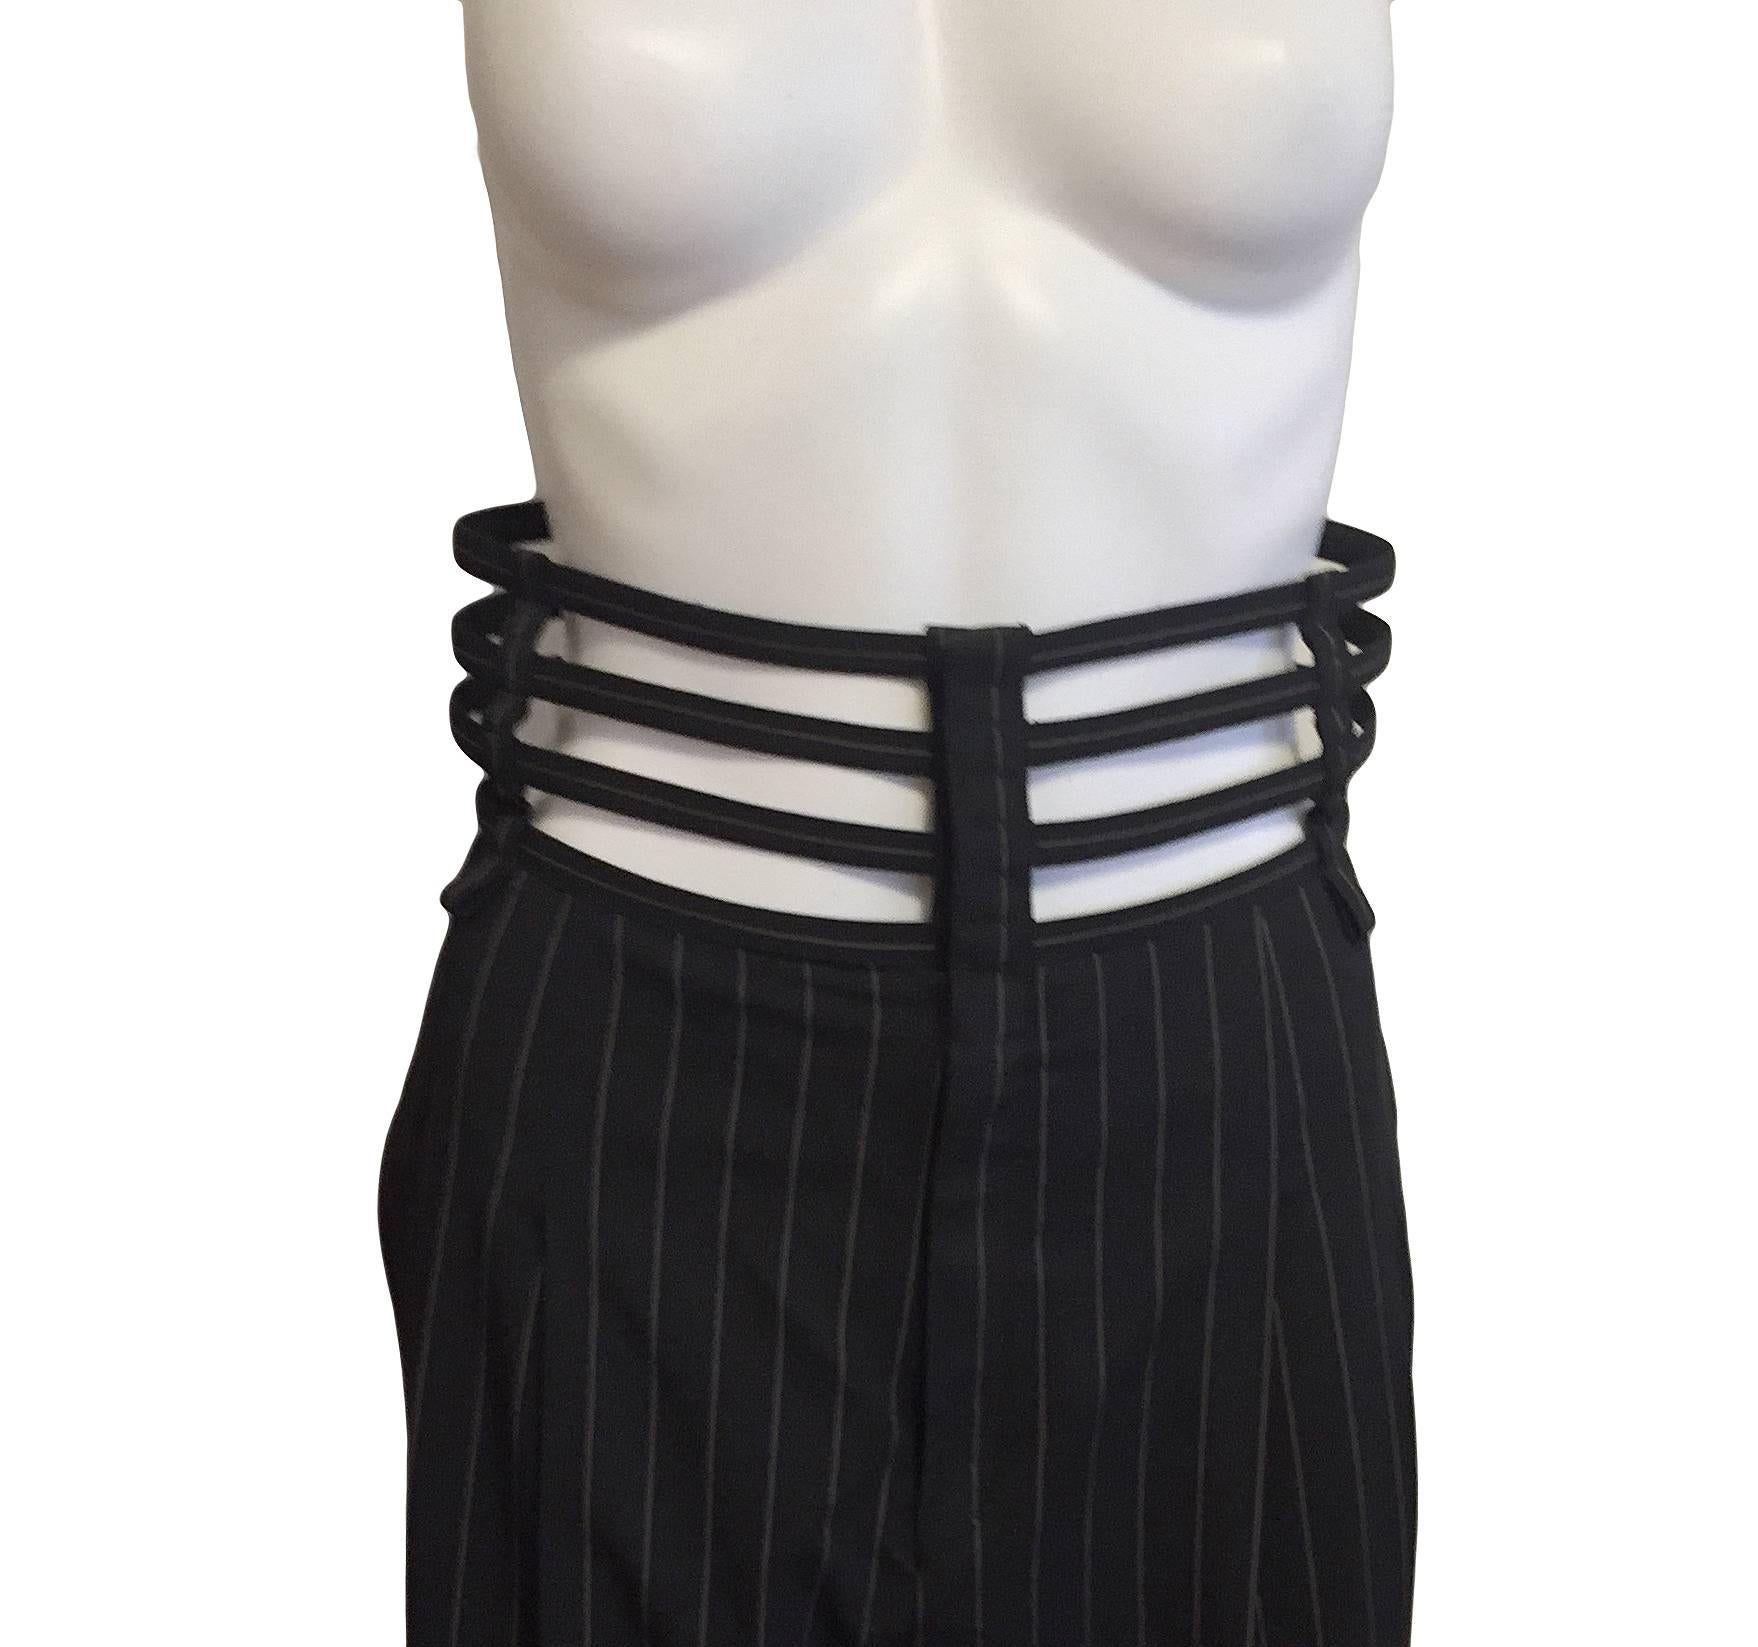 Iconic Jean Paul Gaultier Femme black wool with ivory pinstripes pants with a boned cage at waist.